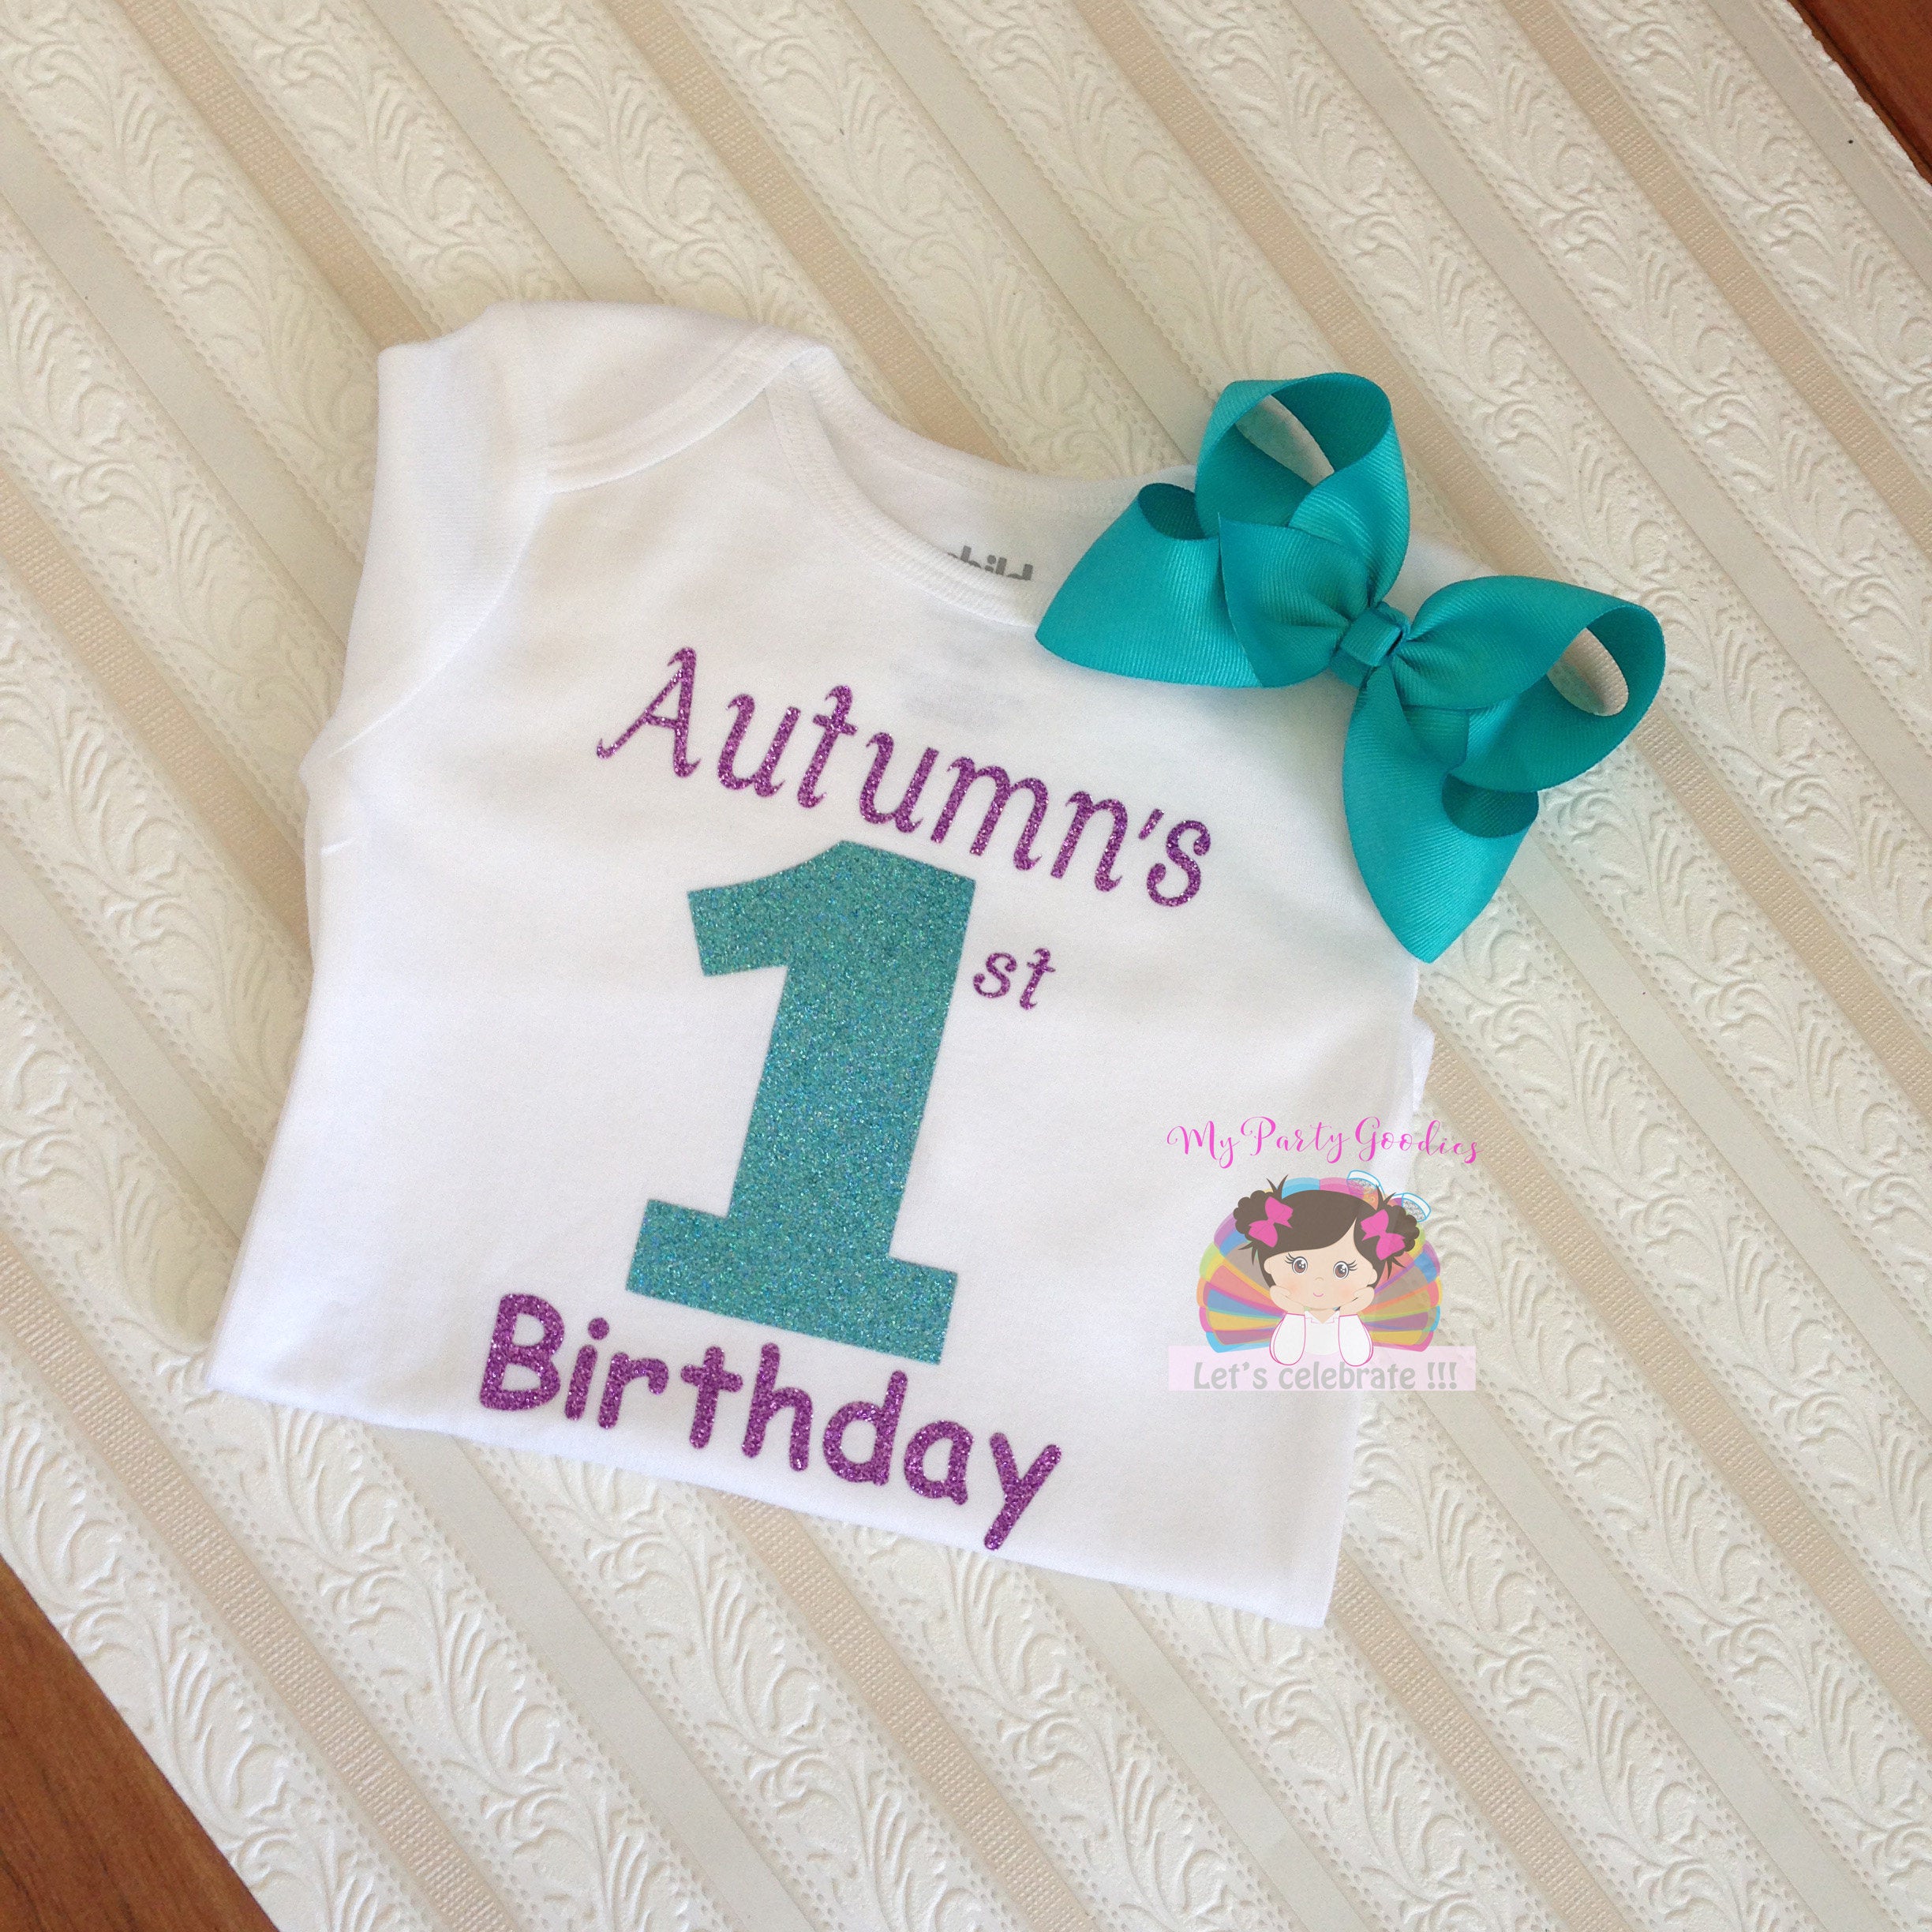 First birthday outfit - Cake smash outfit